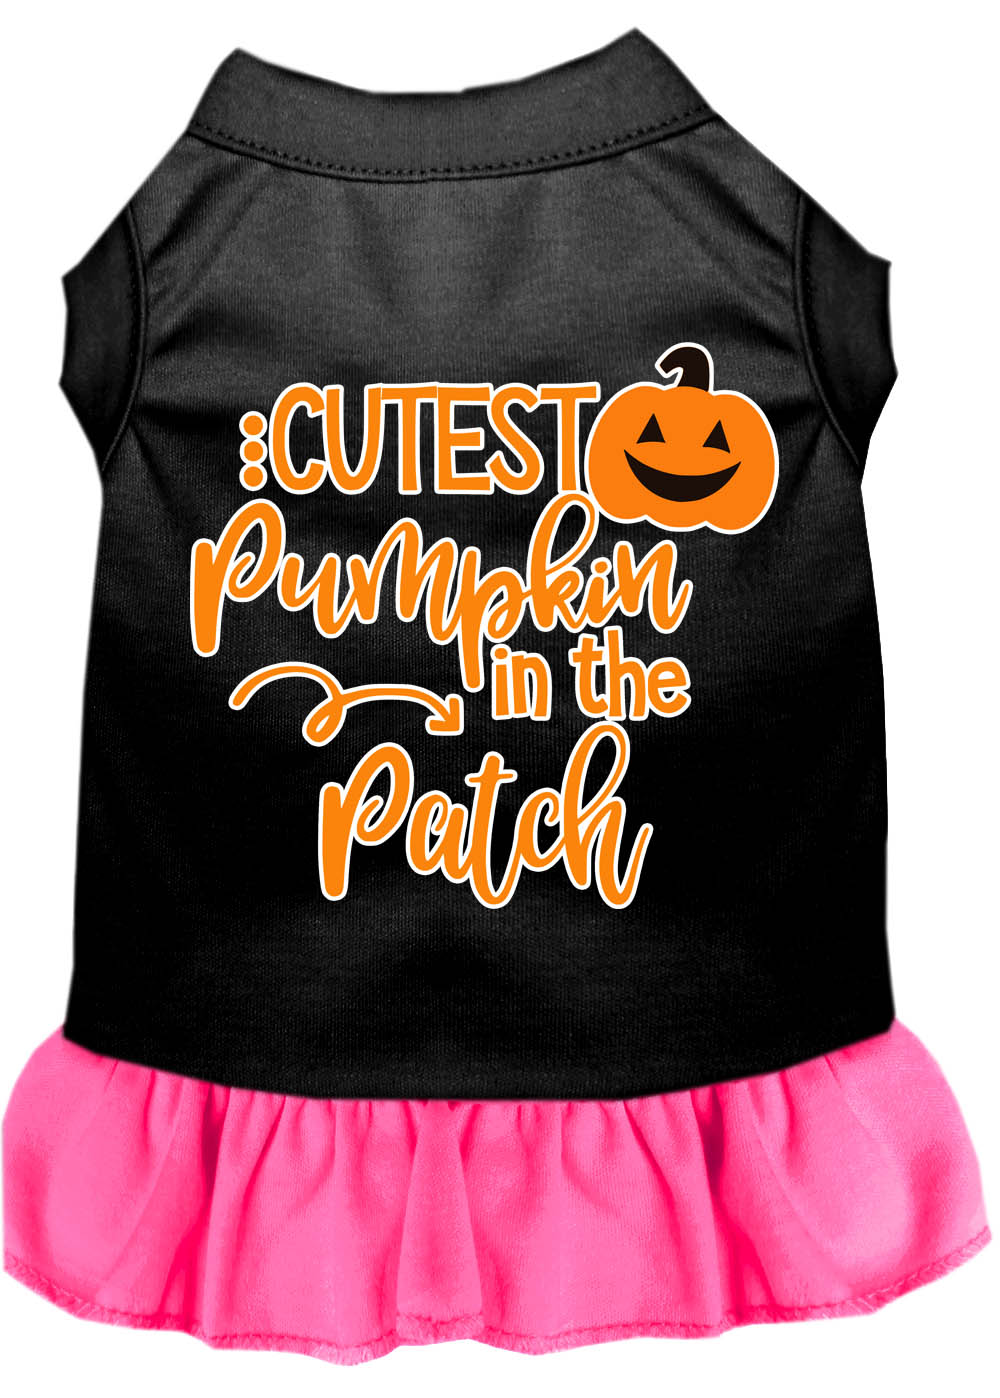 Cutest Pumpkin in the Patch Screen Print Dog Dress Black with Bright Pink XL